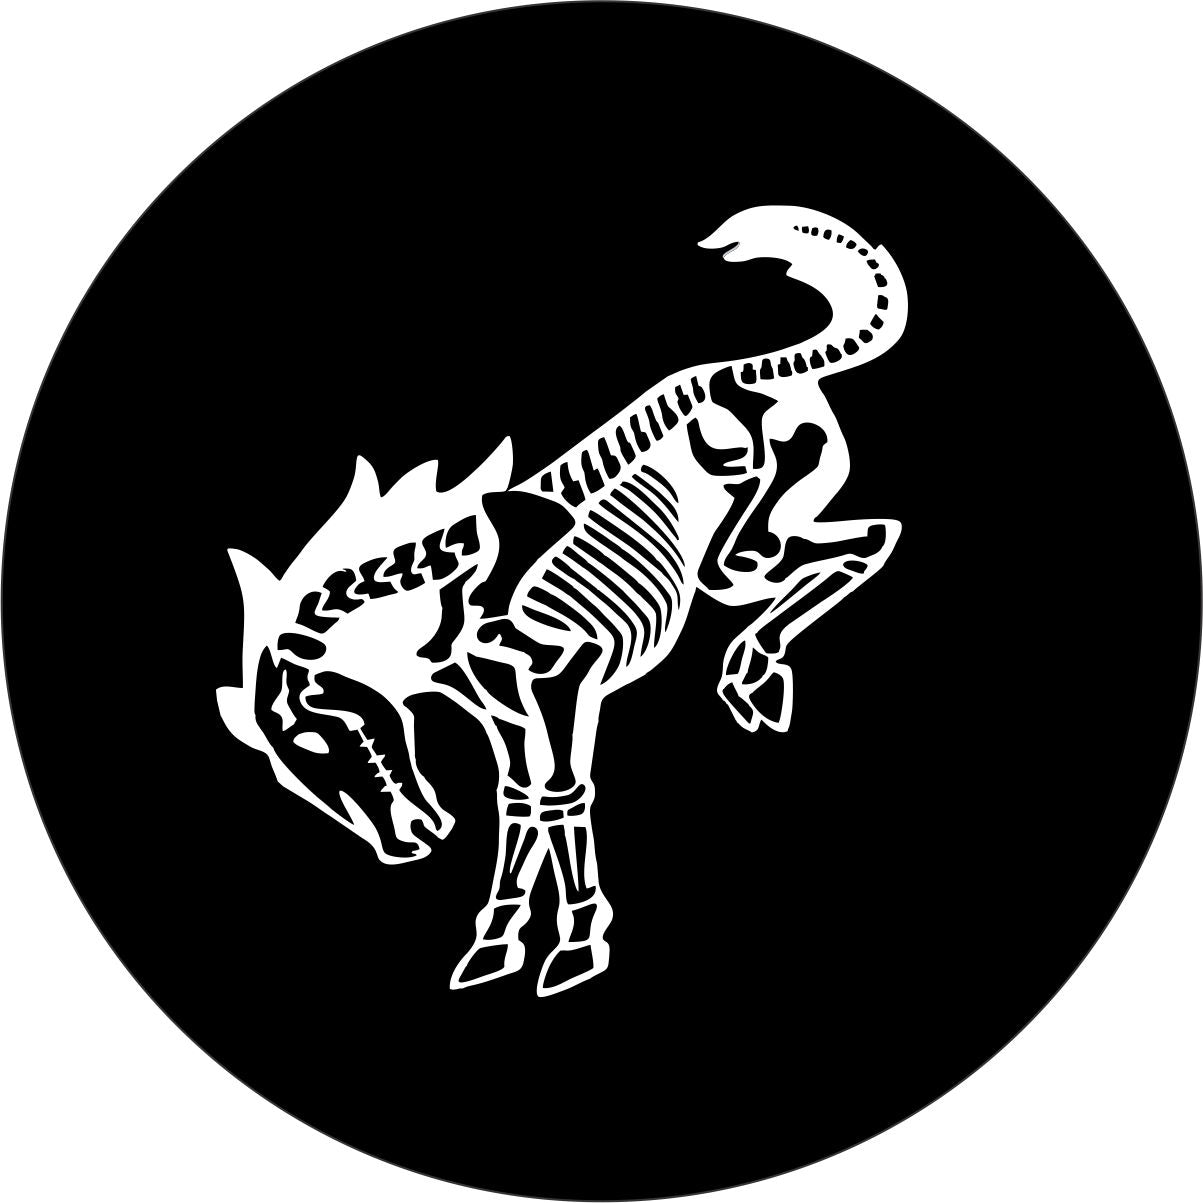 Mock up of a black vinyl spare tire cover with a Bronco horse skeleton design.